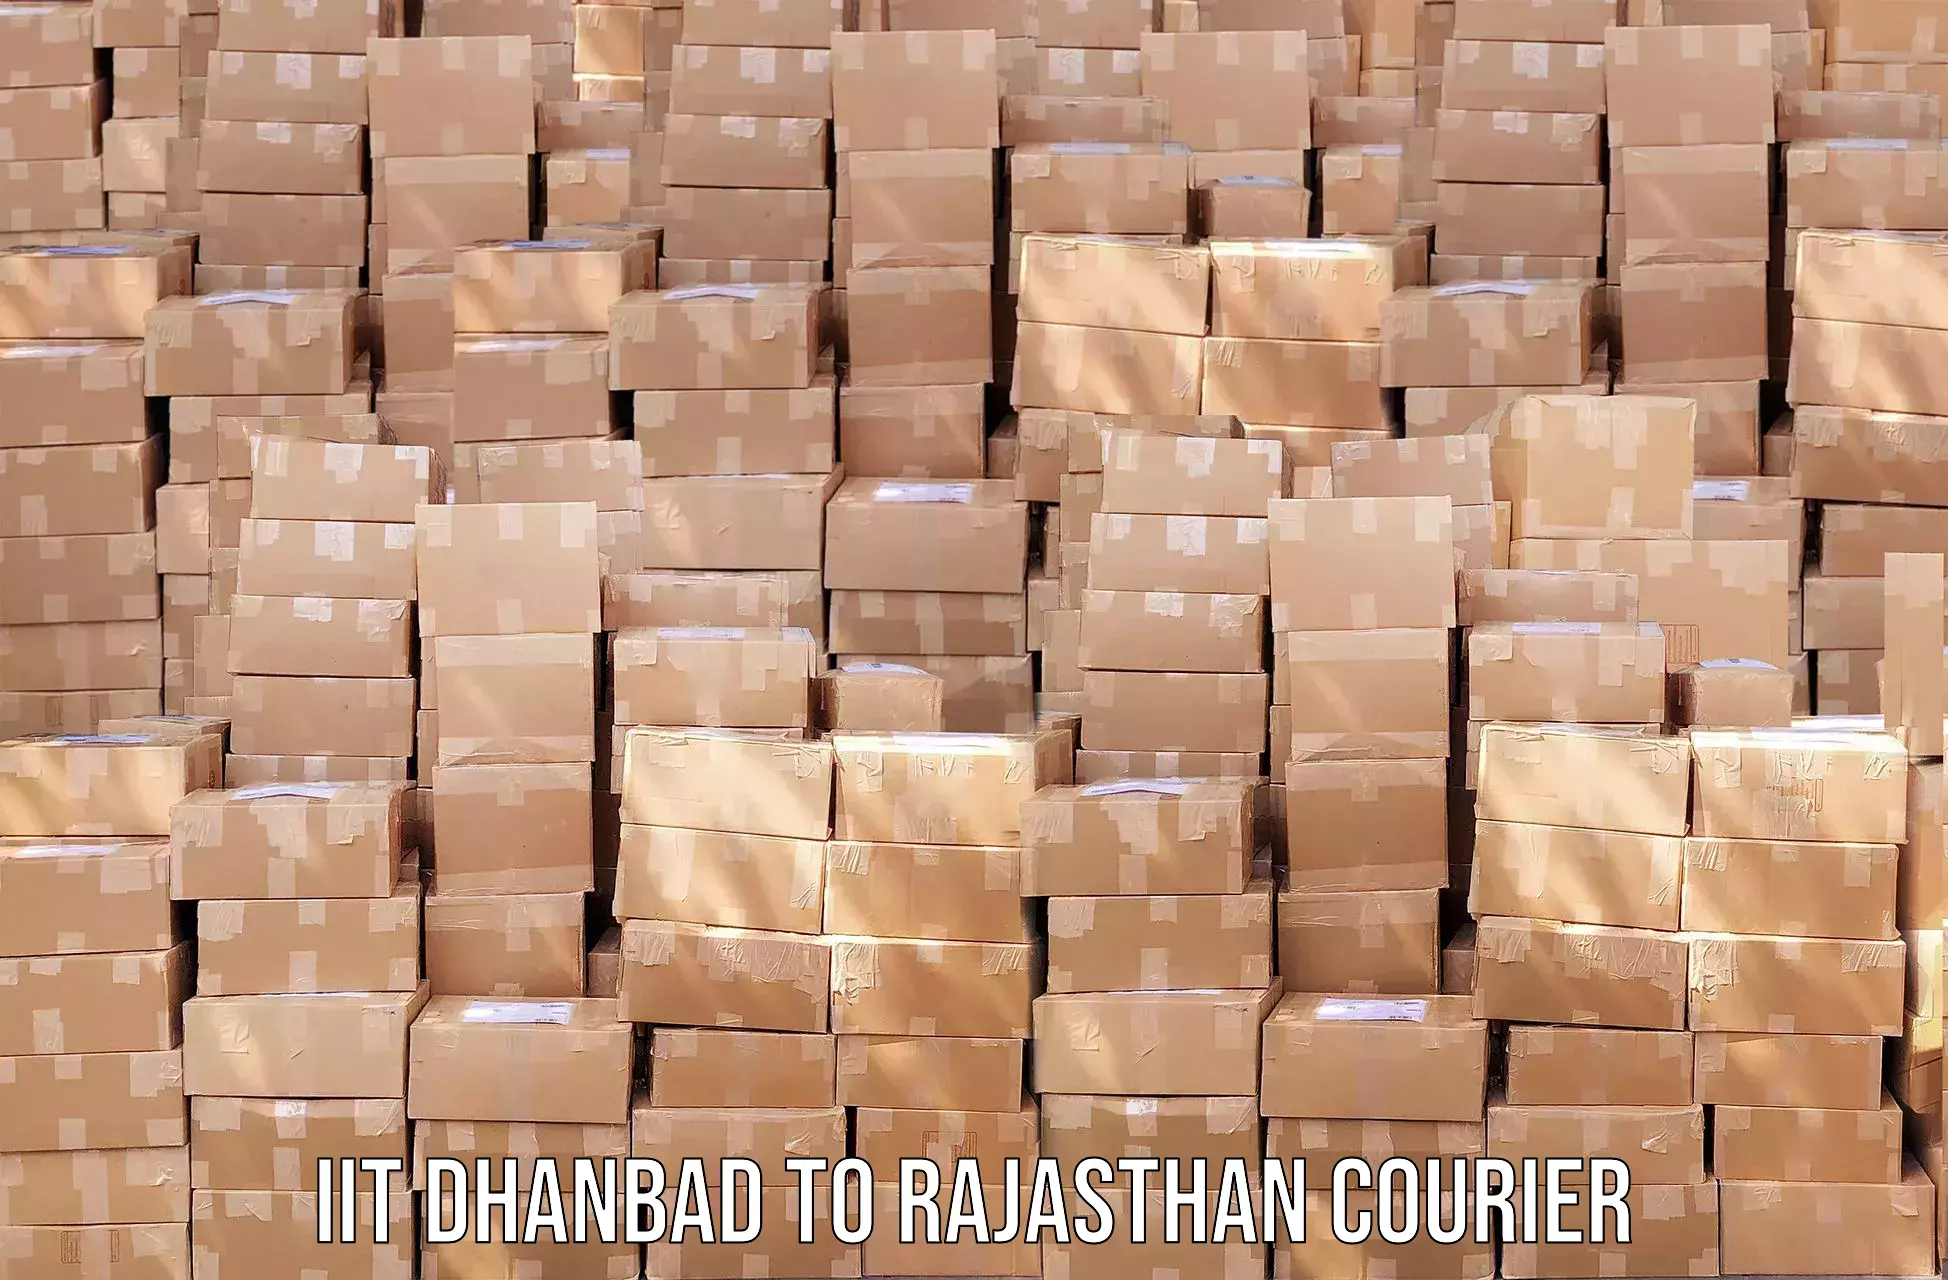 Courier service partnerships IIT Dhanbad to Shrimadhopur